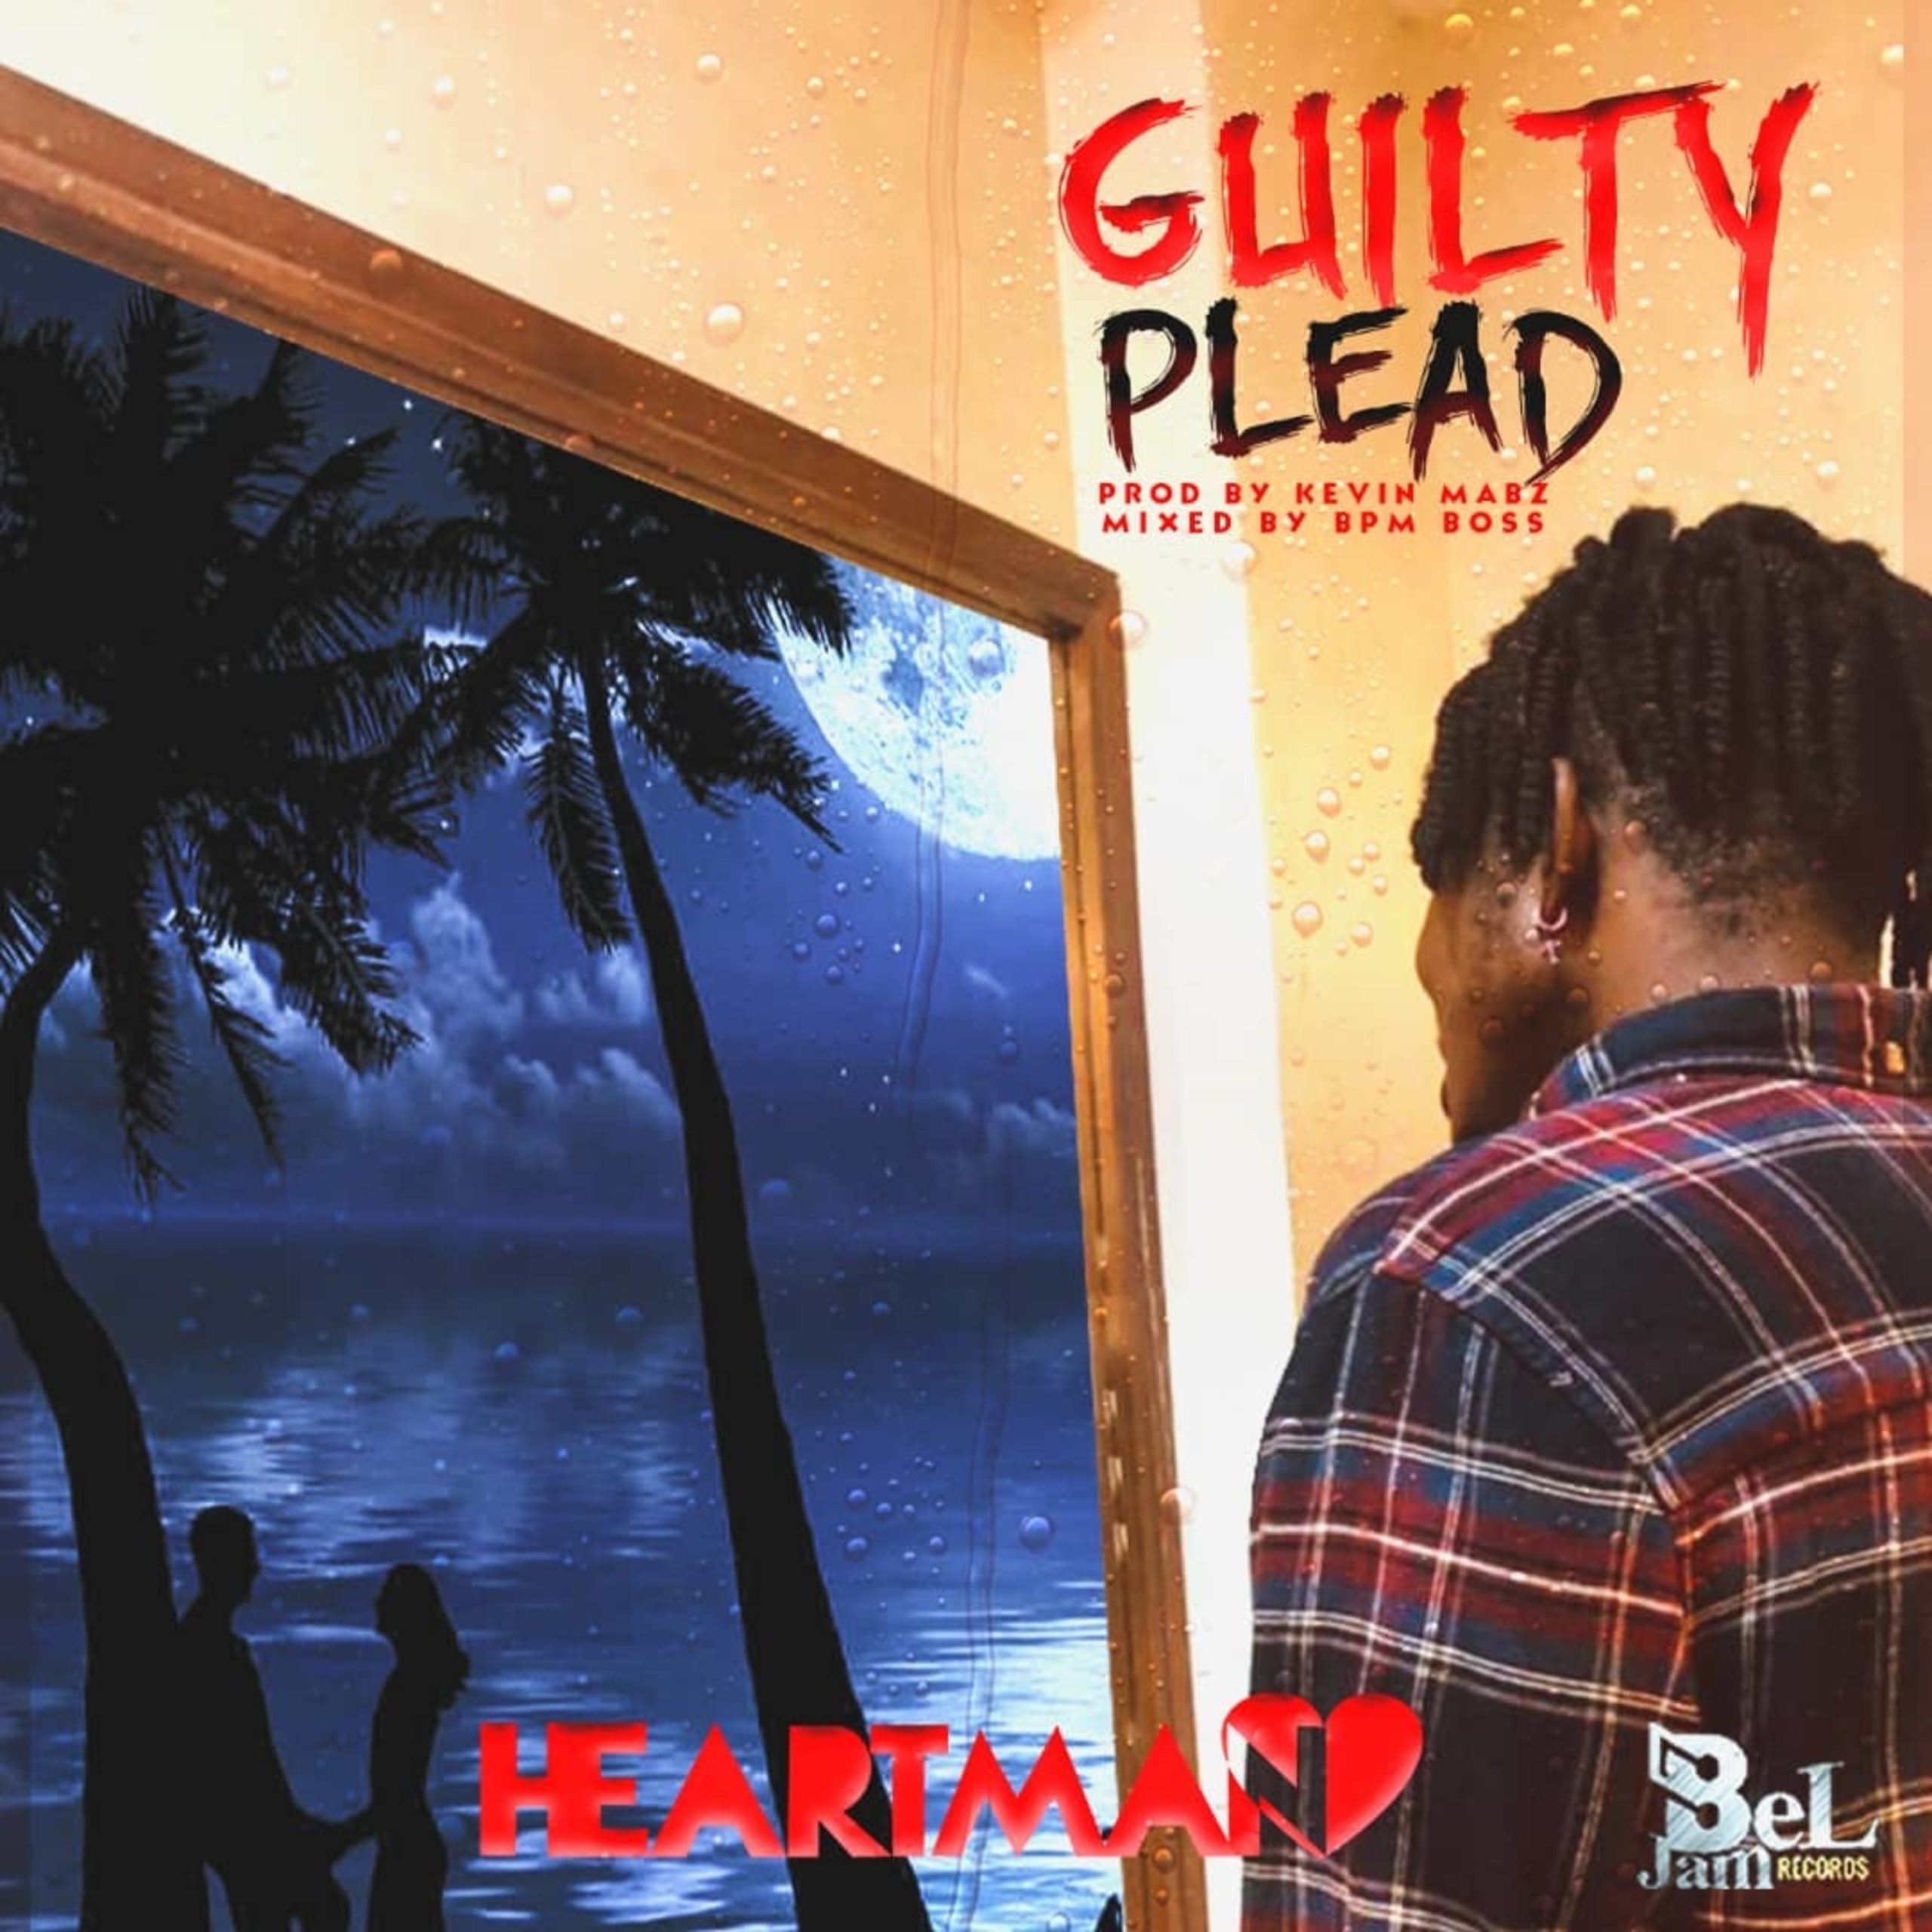 Heartman – Guilty Plead (Freestyle) (Prod by Kevin Mabz)